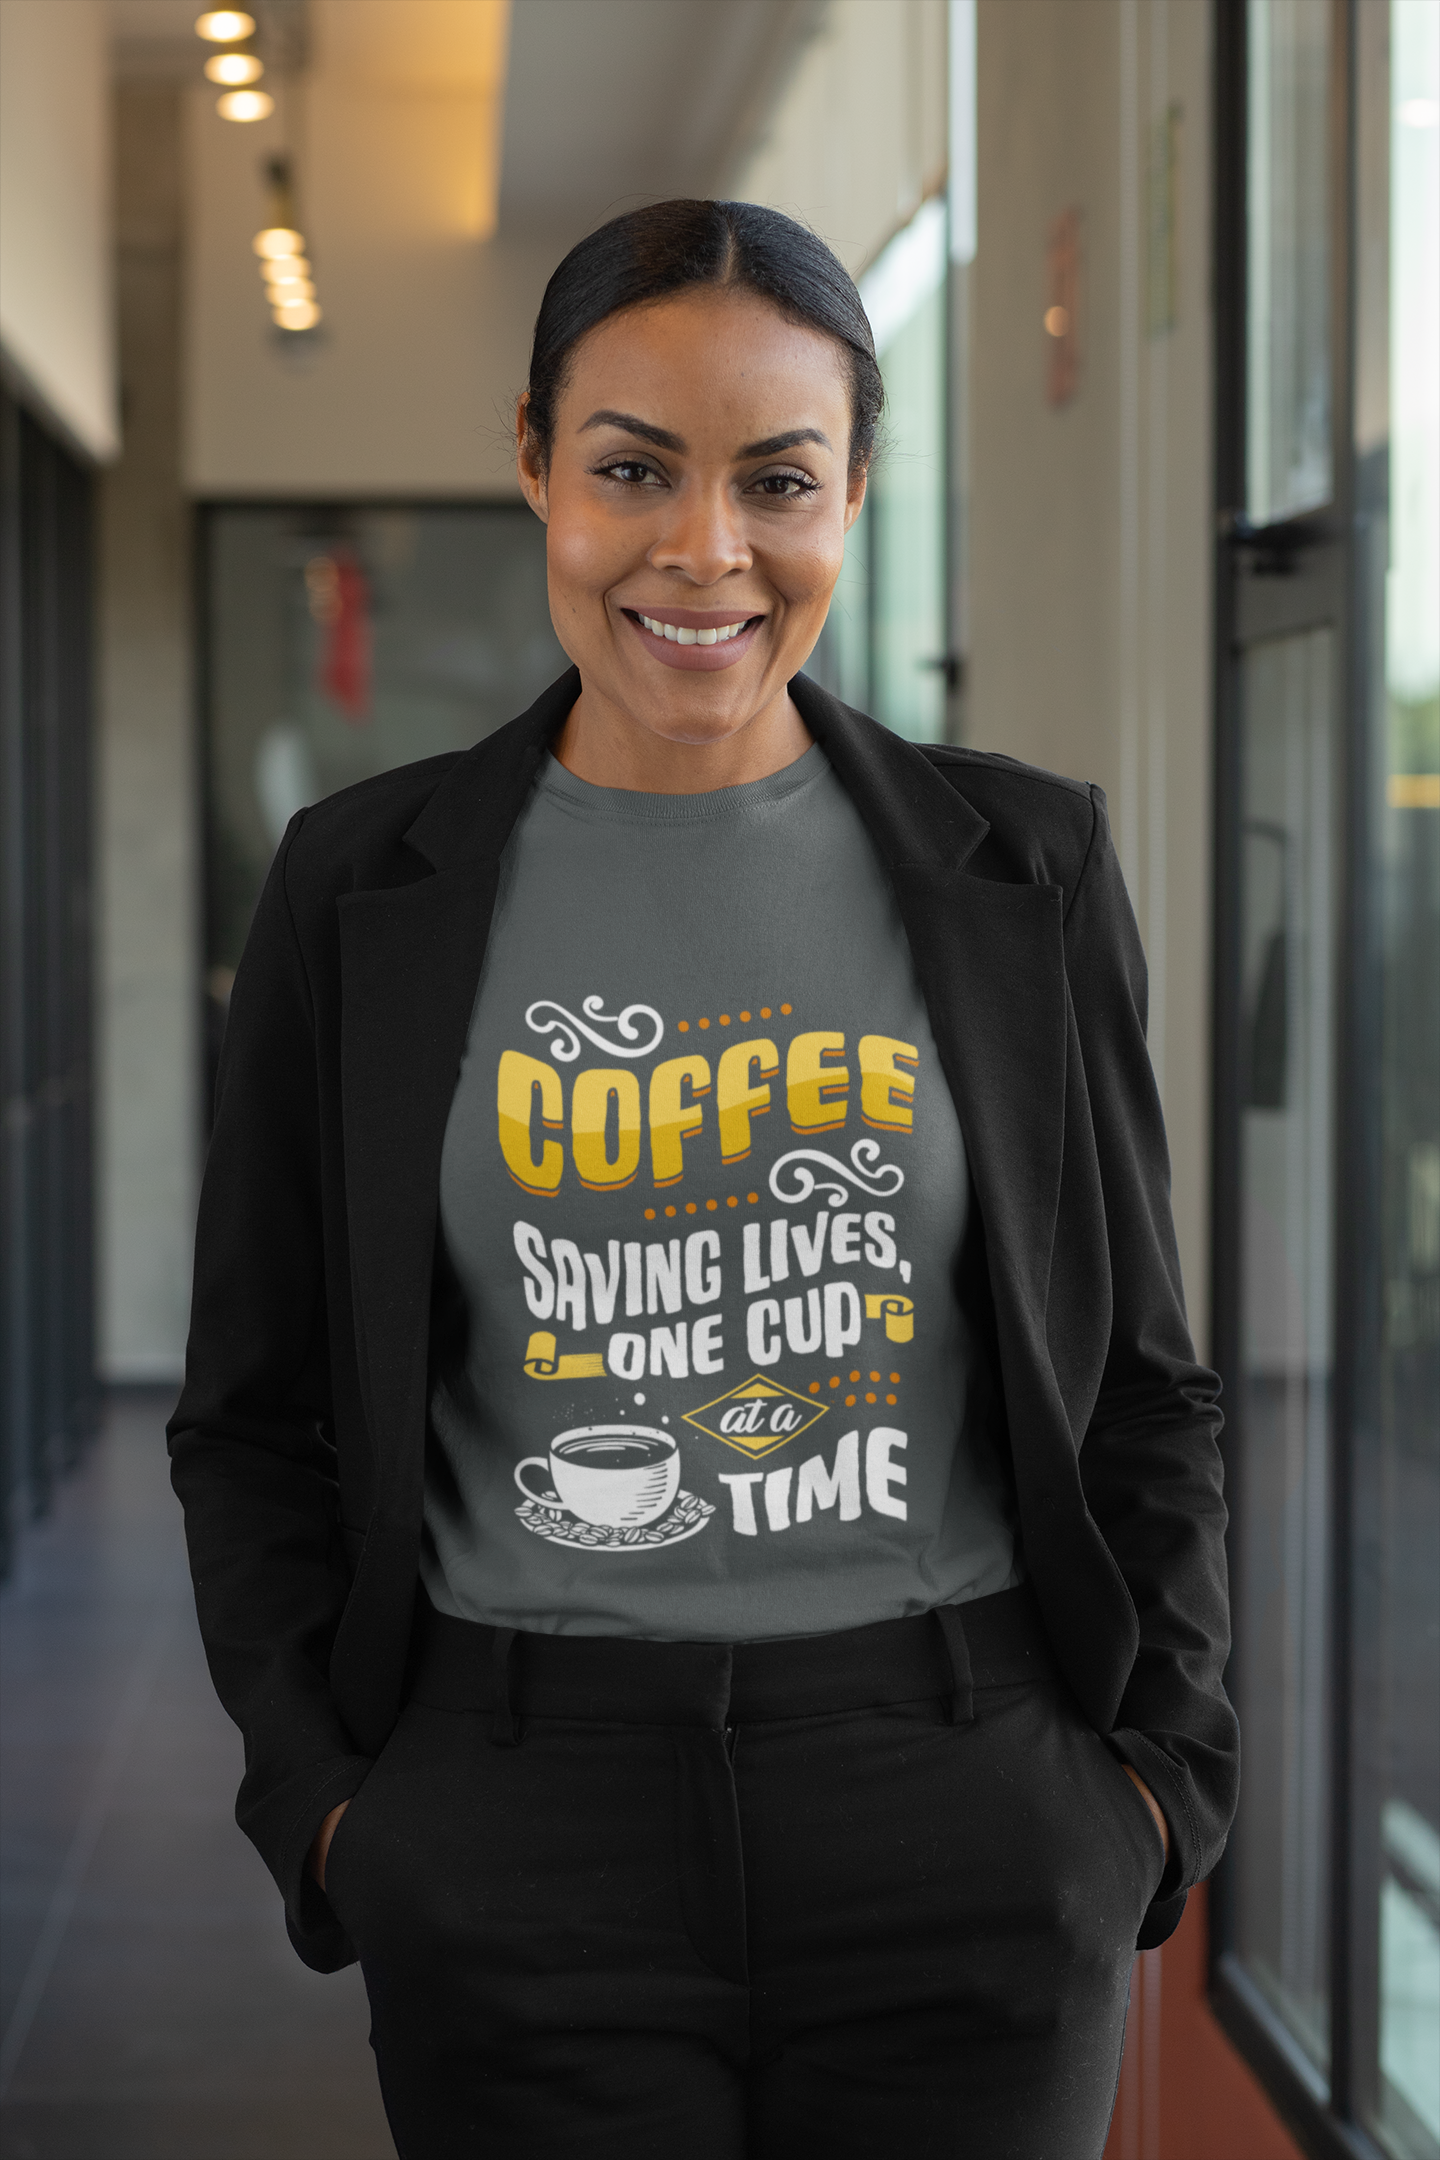 Buy 'Coffee - Saving Lives' Tee | Exclusive Unisex Shirt for Coffee Enthusiasts